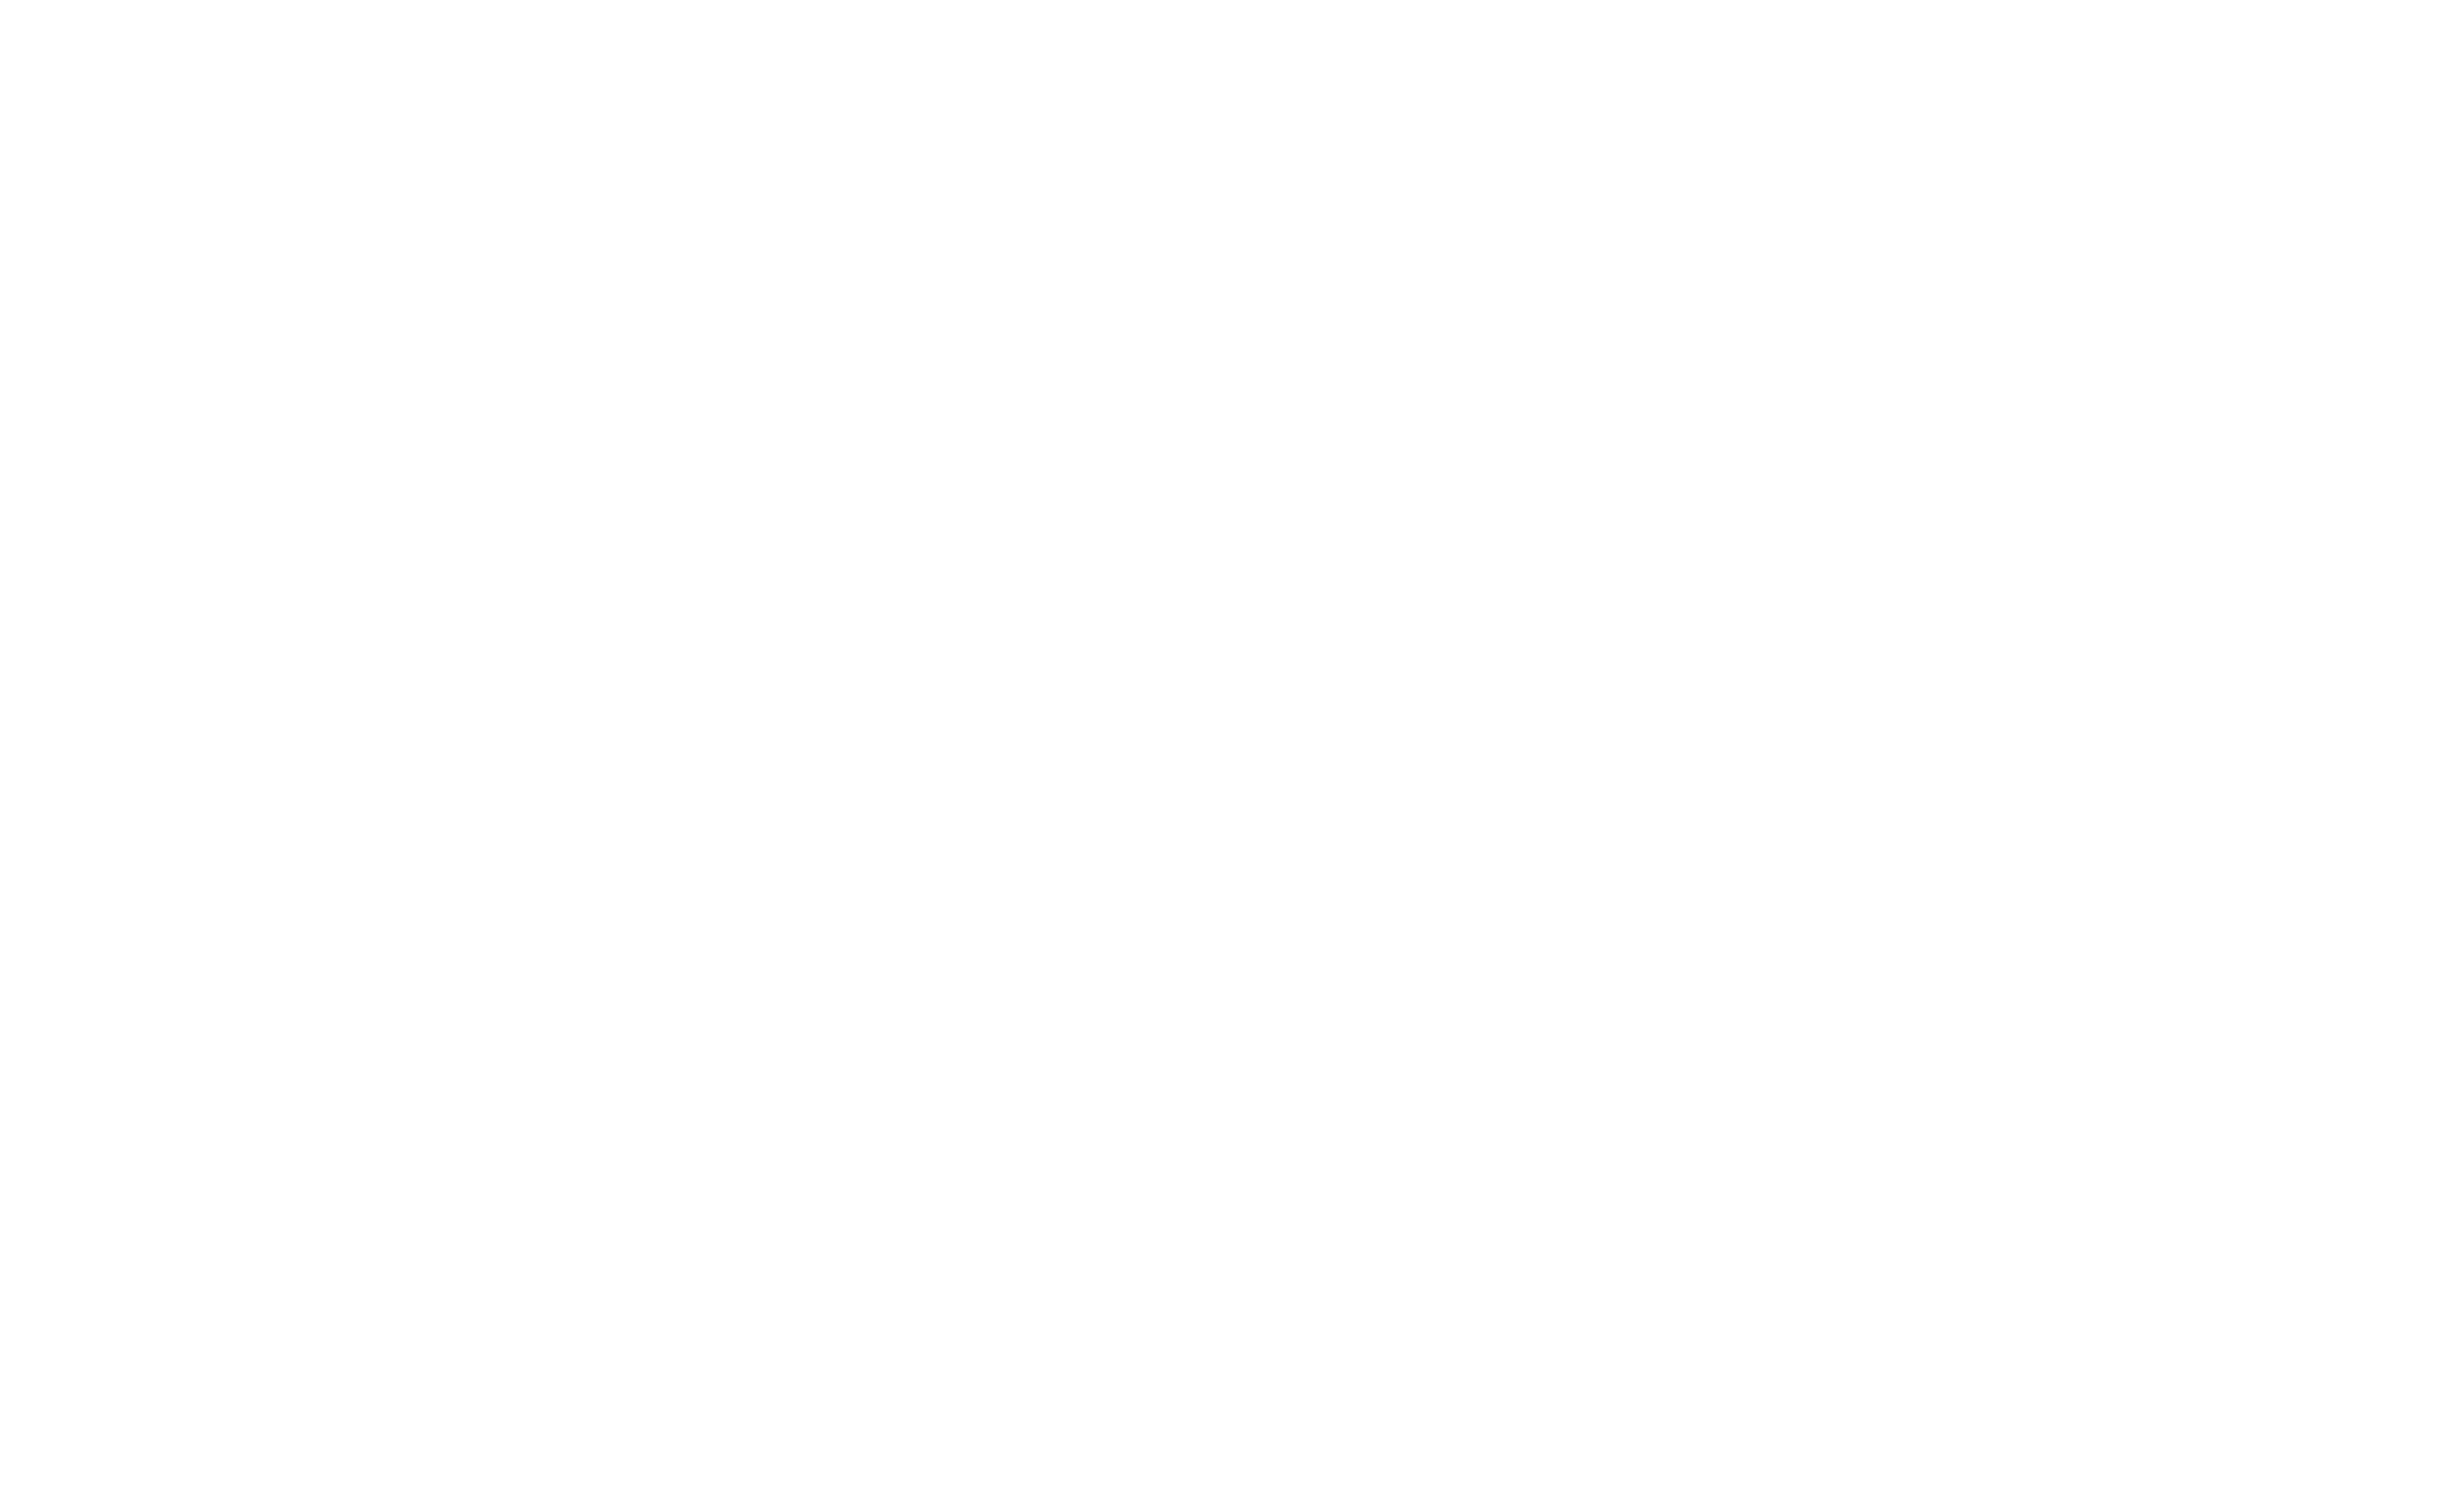 Britain's Bravest Manufacturing Company